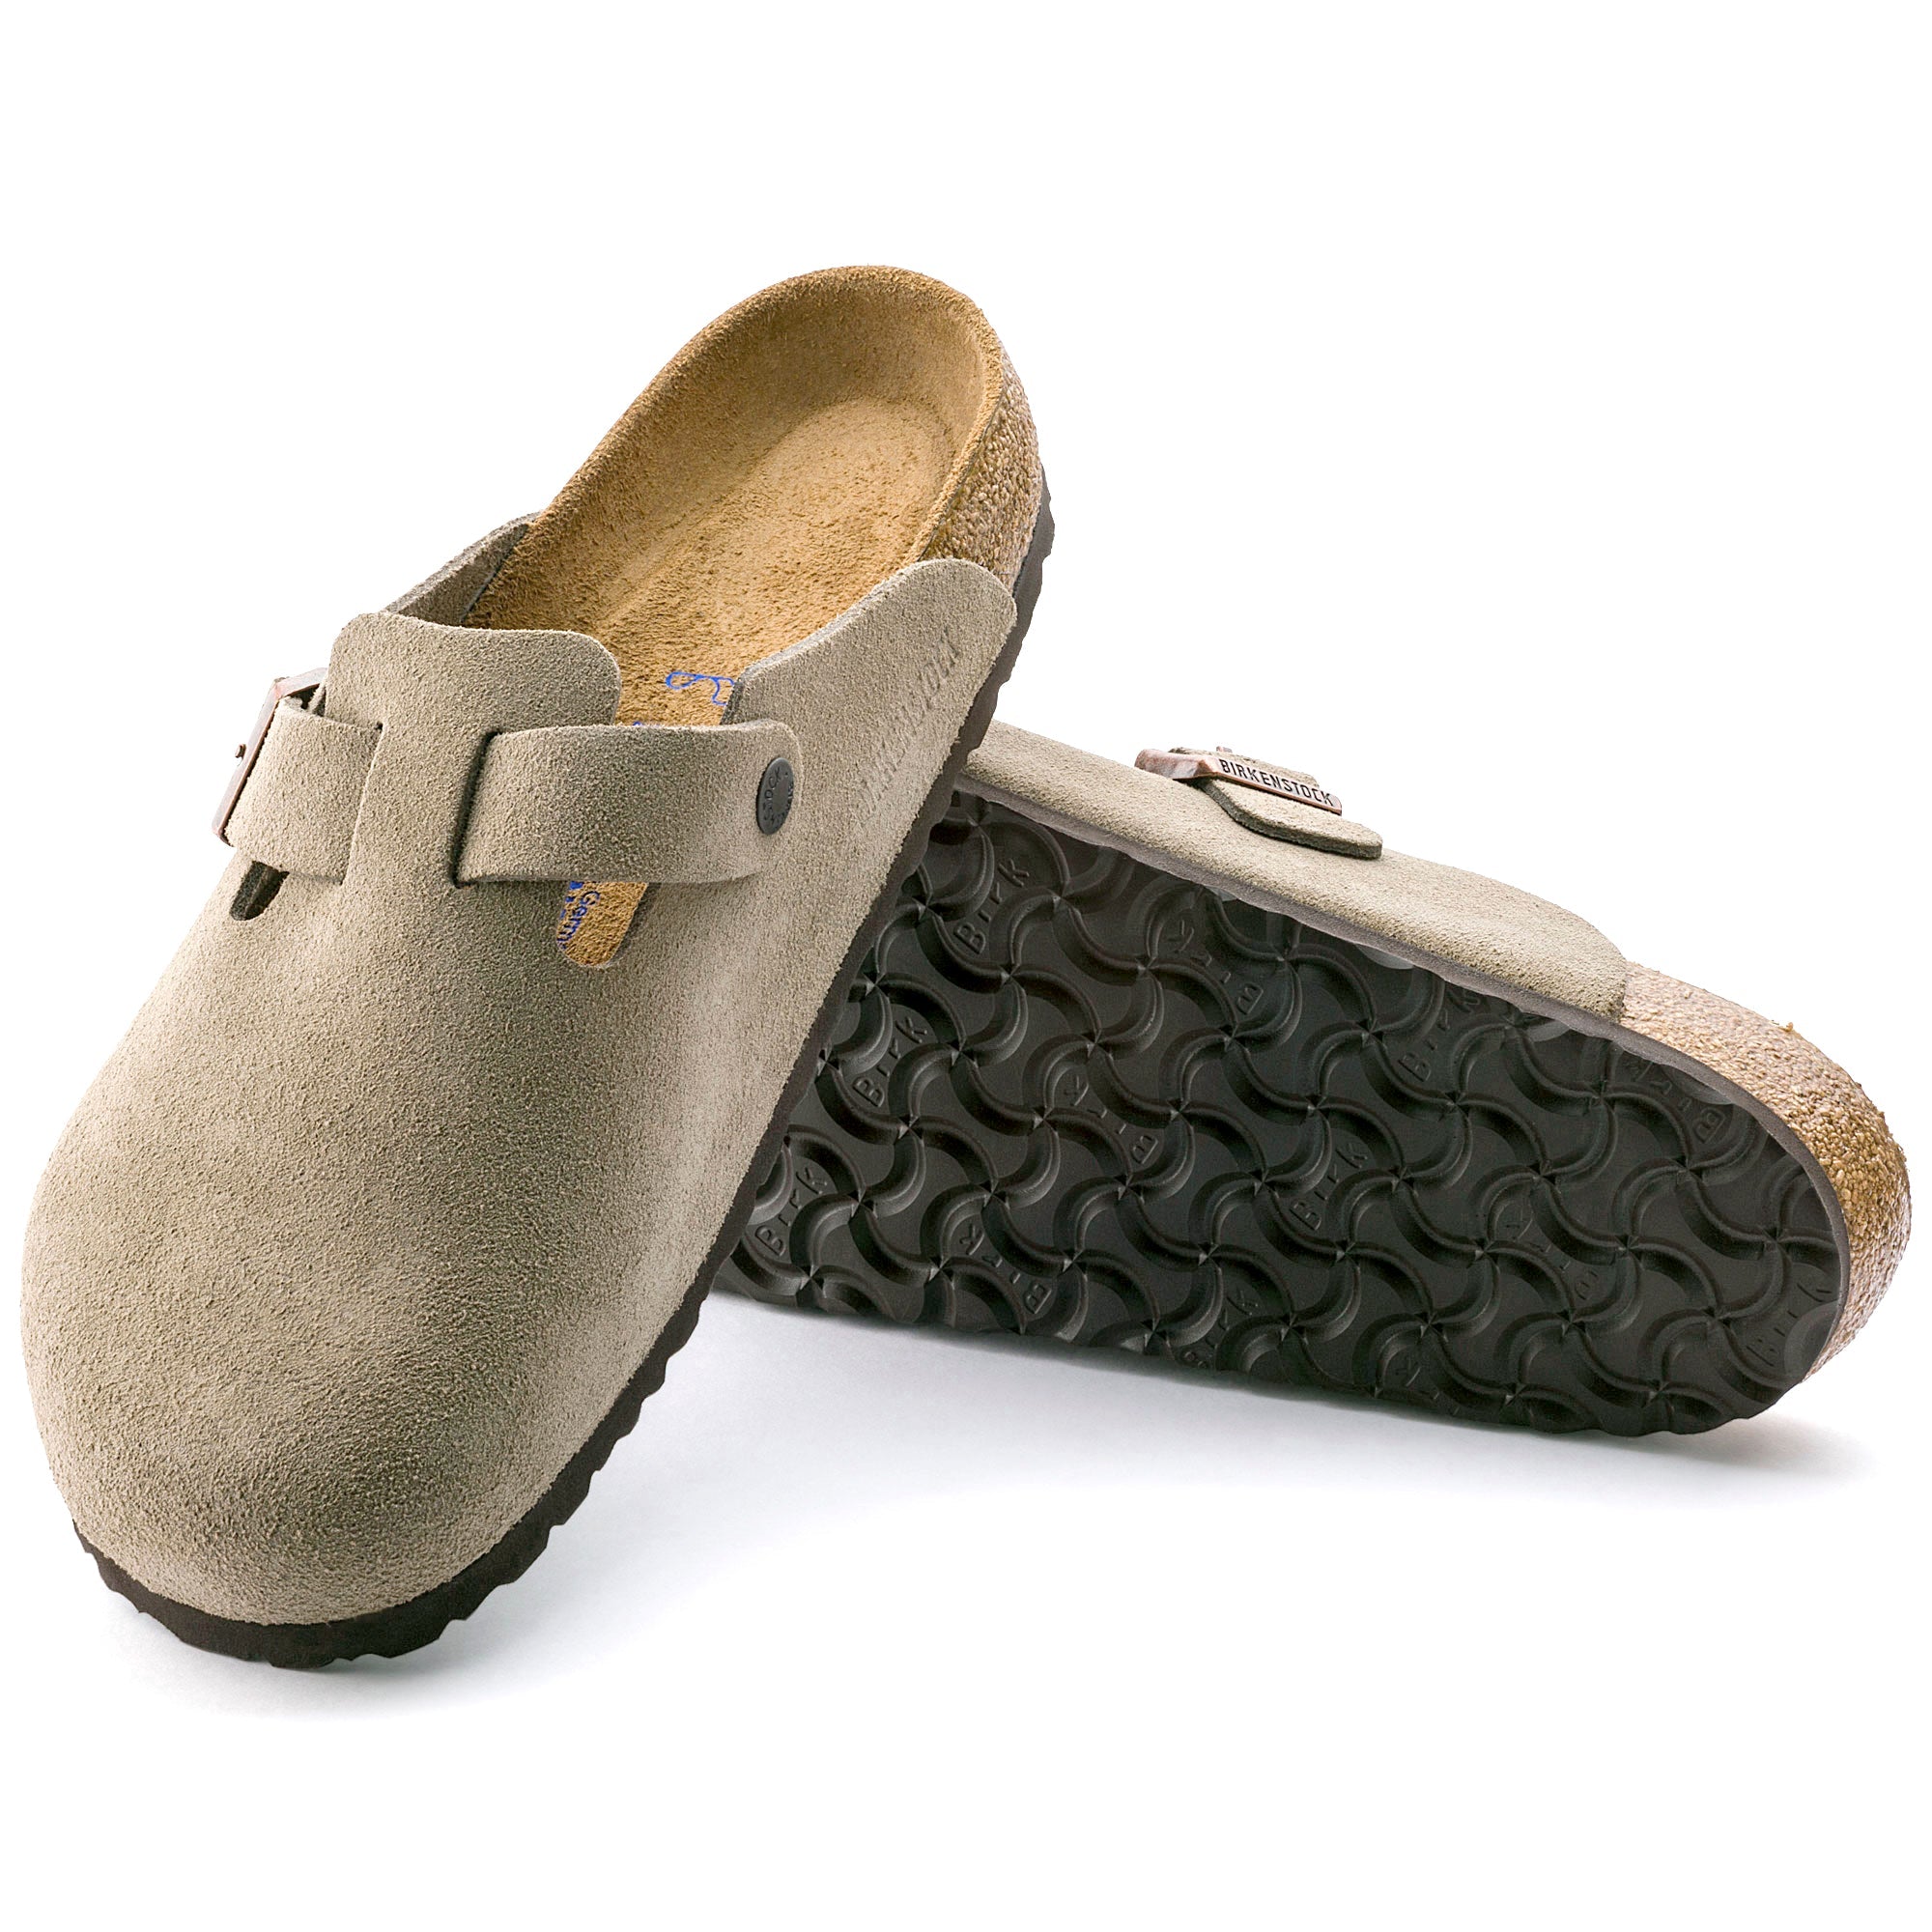 Birkenstock Boston Soft Footbed Suede Leather Color: Taupe (MEDIUM/NARROW WIDTH) 4